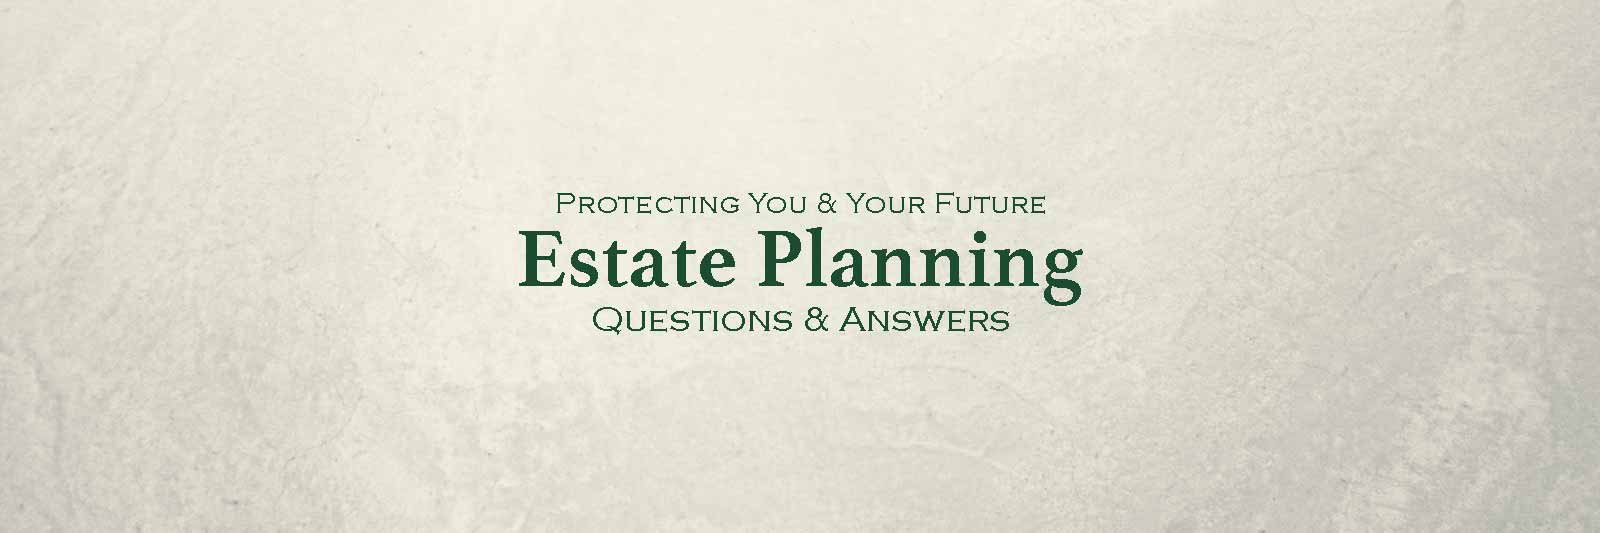 Protecting You & Your Future: Estate Planning Questions and Answers